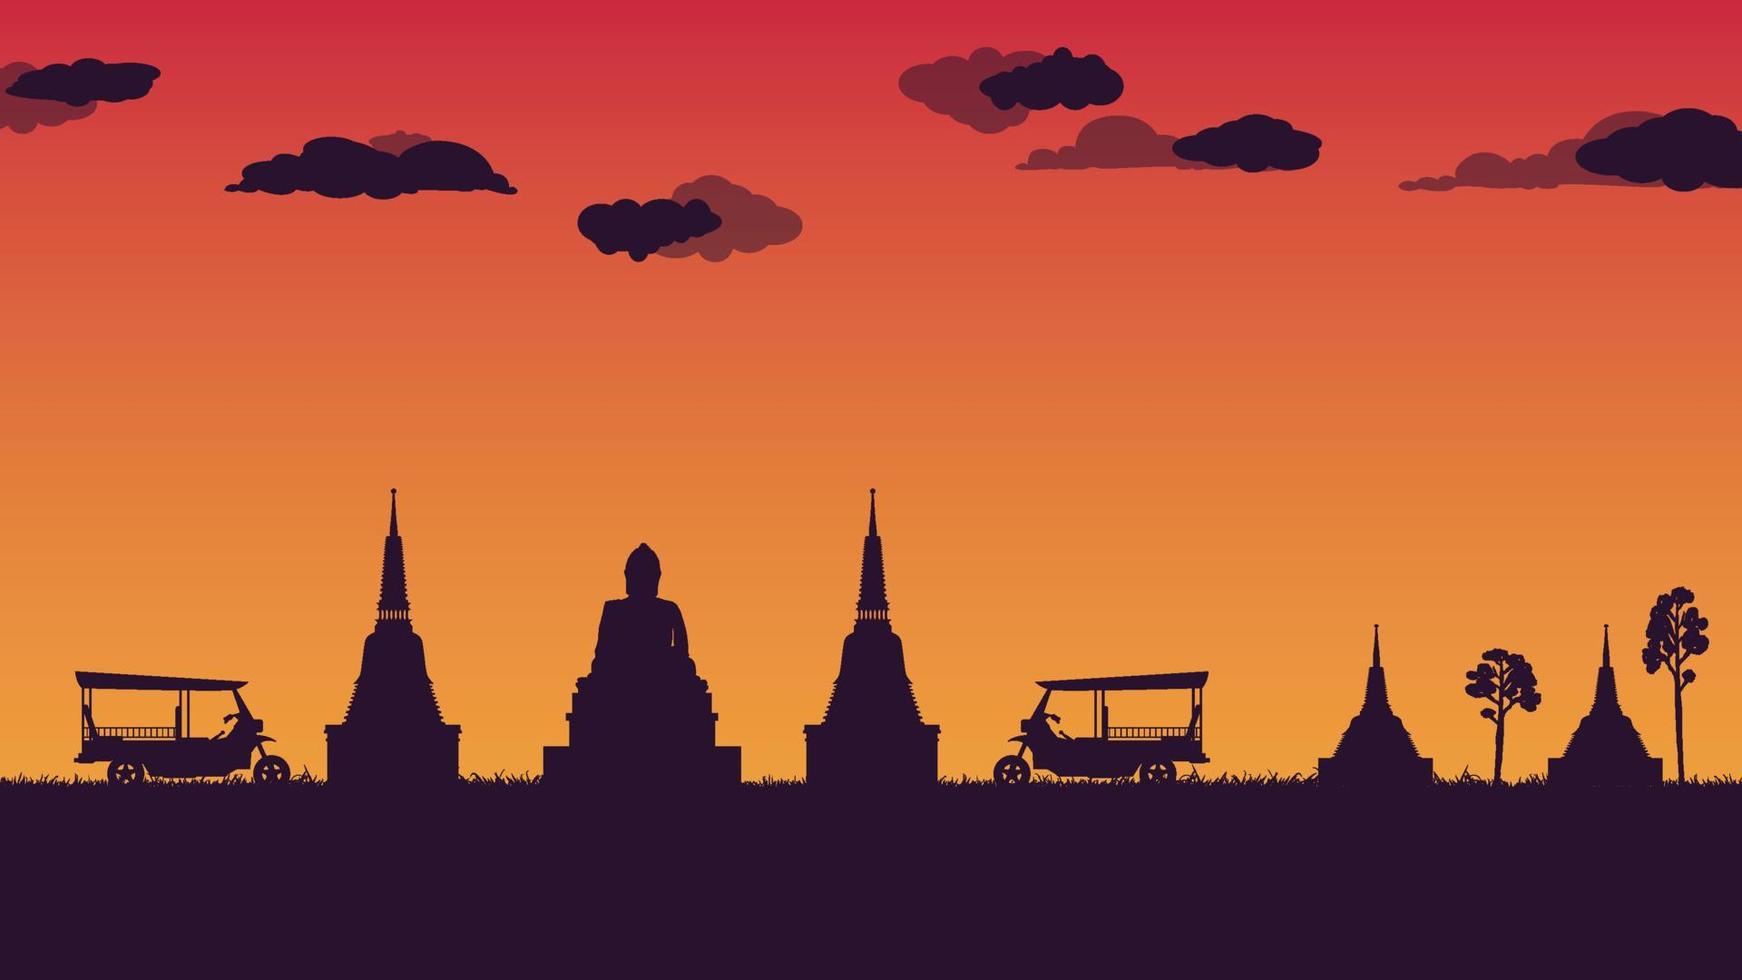 silhouette of tuk tuk traditional taxi and pagoda and temple at Thailand on gradient background vector